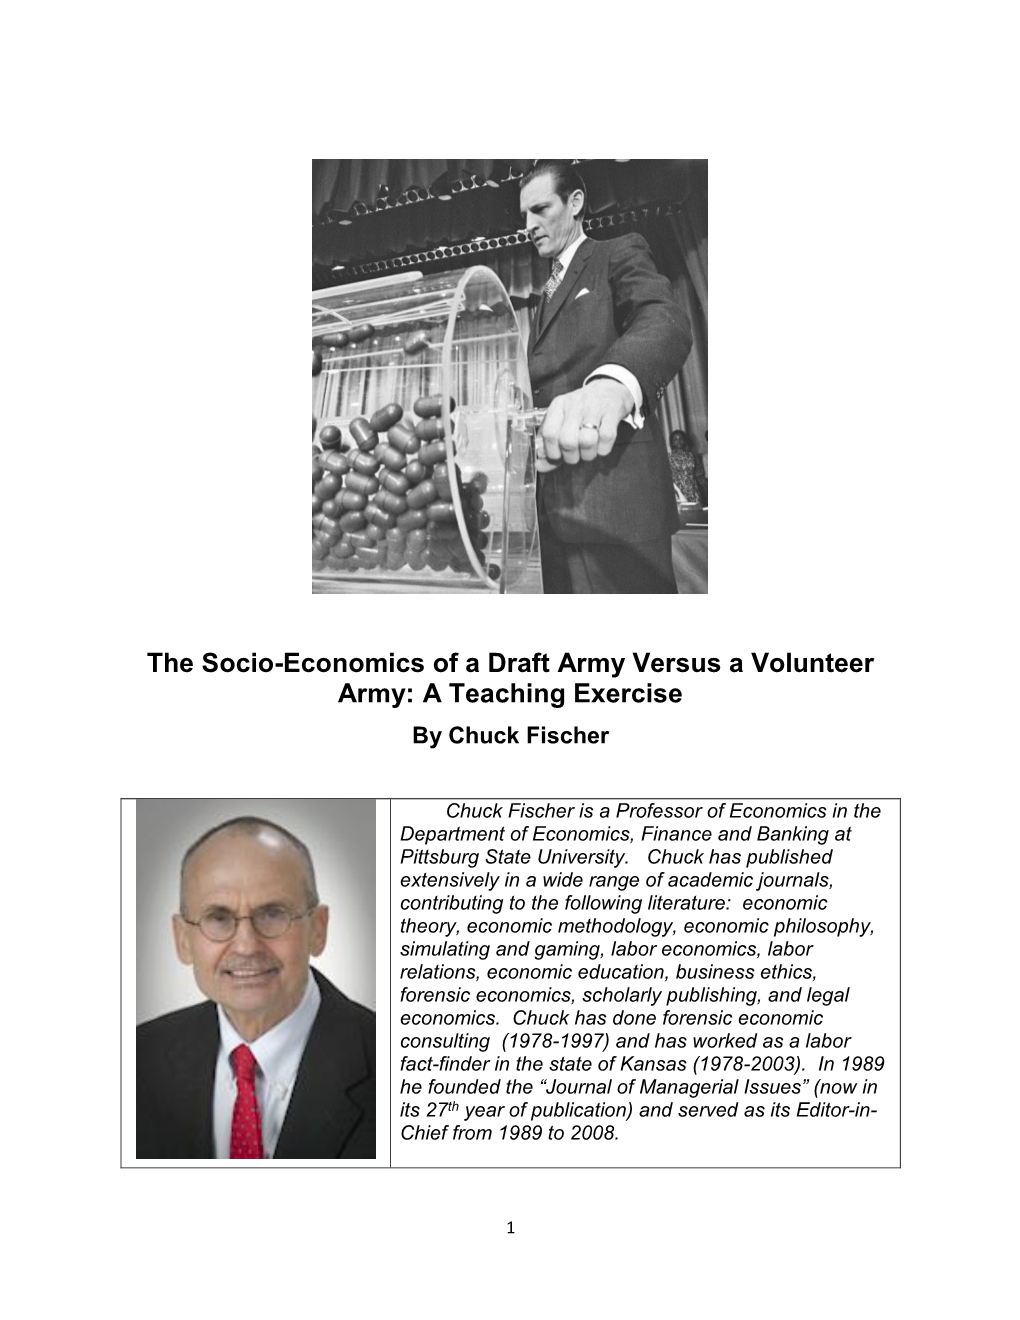 The Socio-Economics of a Draft Army Versus a Volunteer Army: a Teaching Exercise by Chuck Fischer